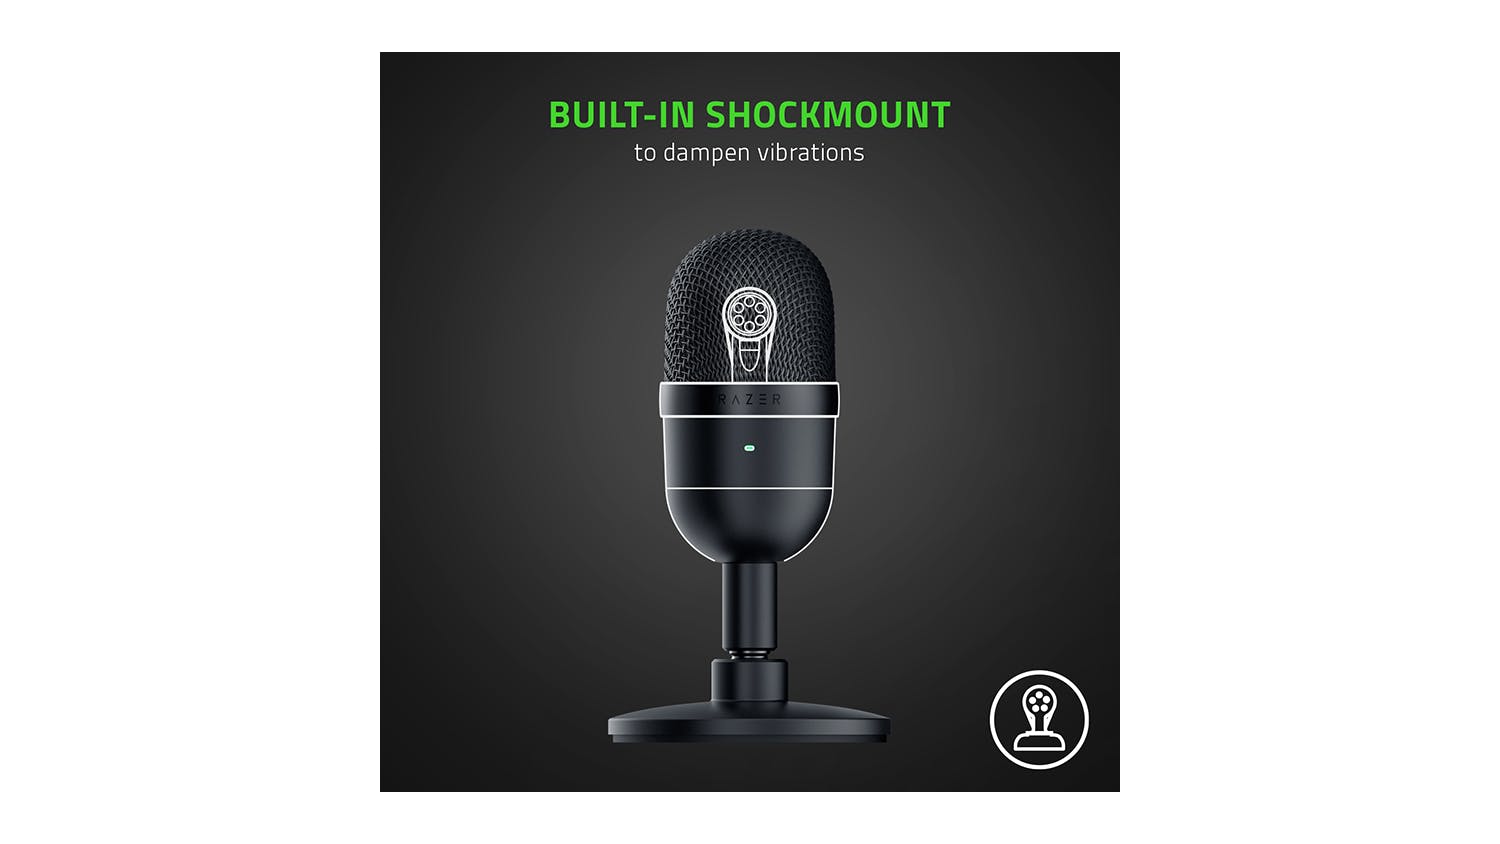 Razer Seiren Mini USB Ultra Compact Condenser Microphone for Streaming and  Gaming on PC, Black